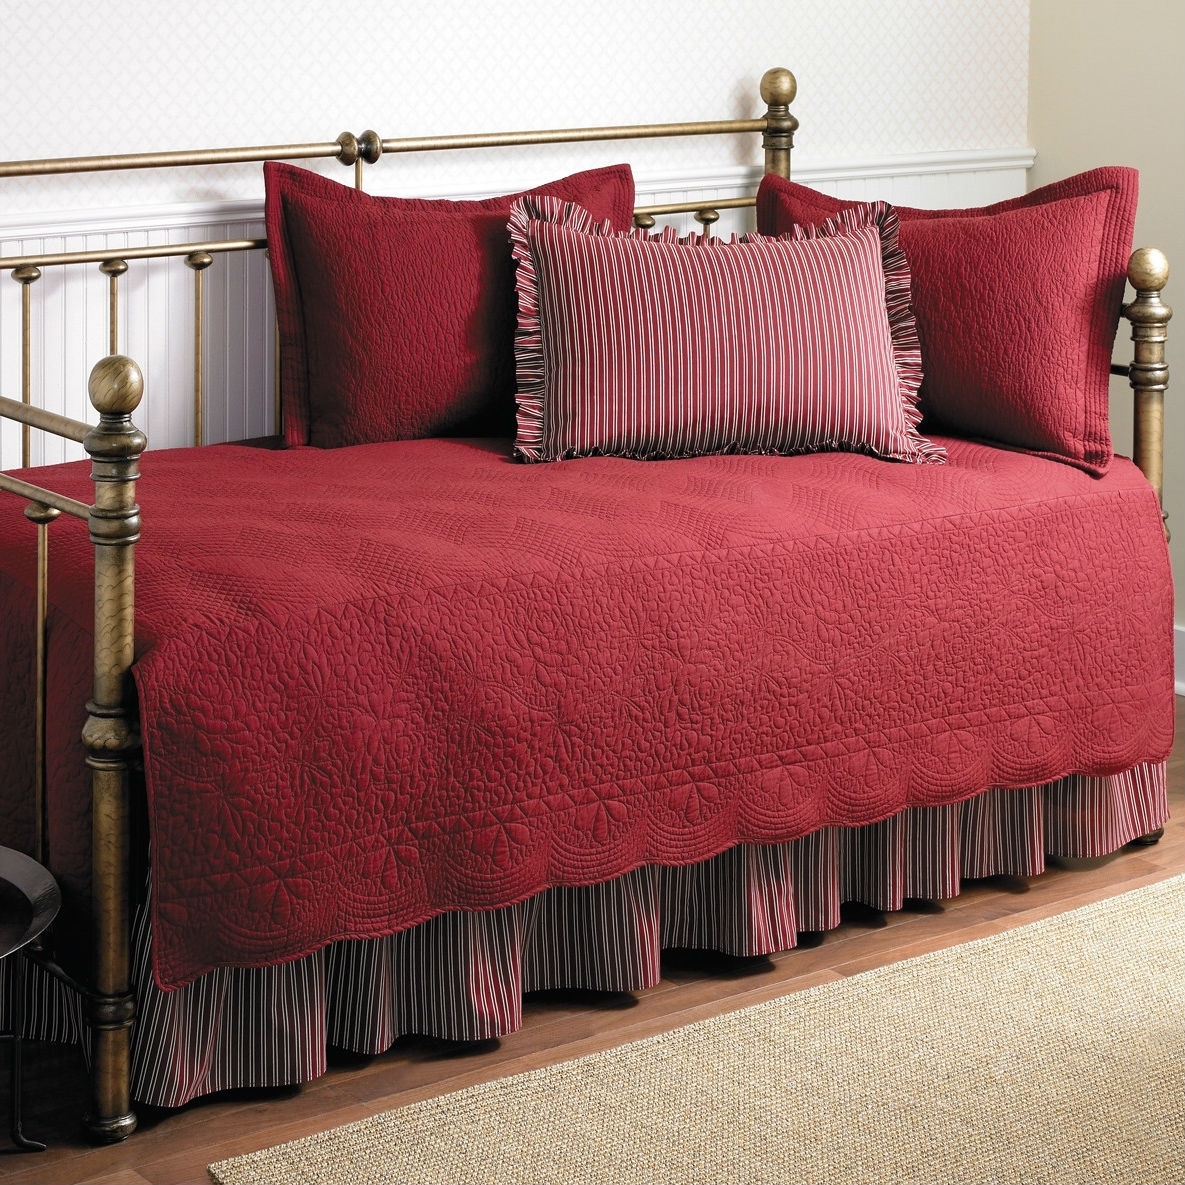 Twin size 5-Piece Daybed Cover Ensemble Quilt Set in Scarlet Red Cotton